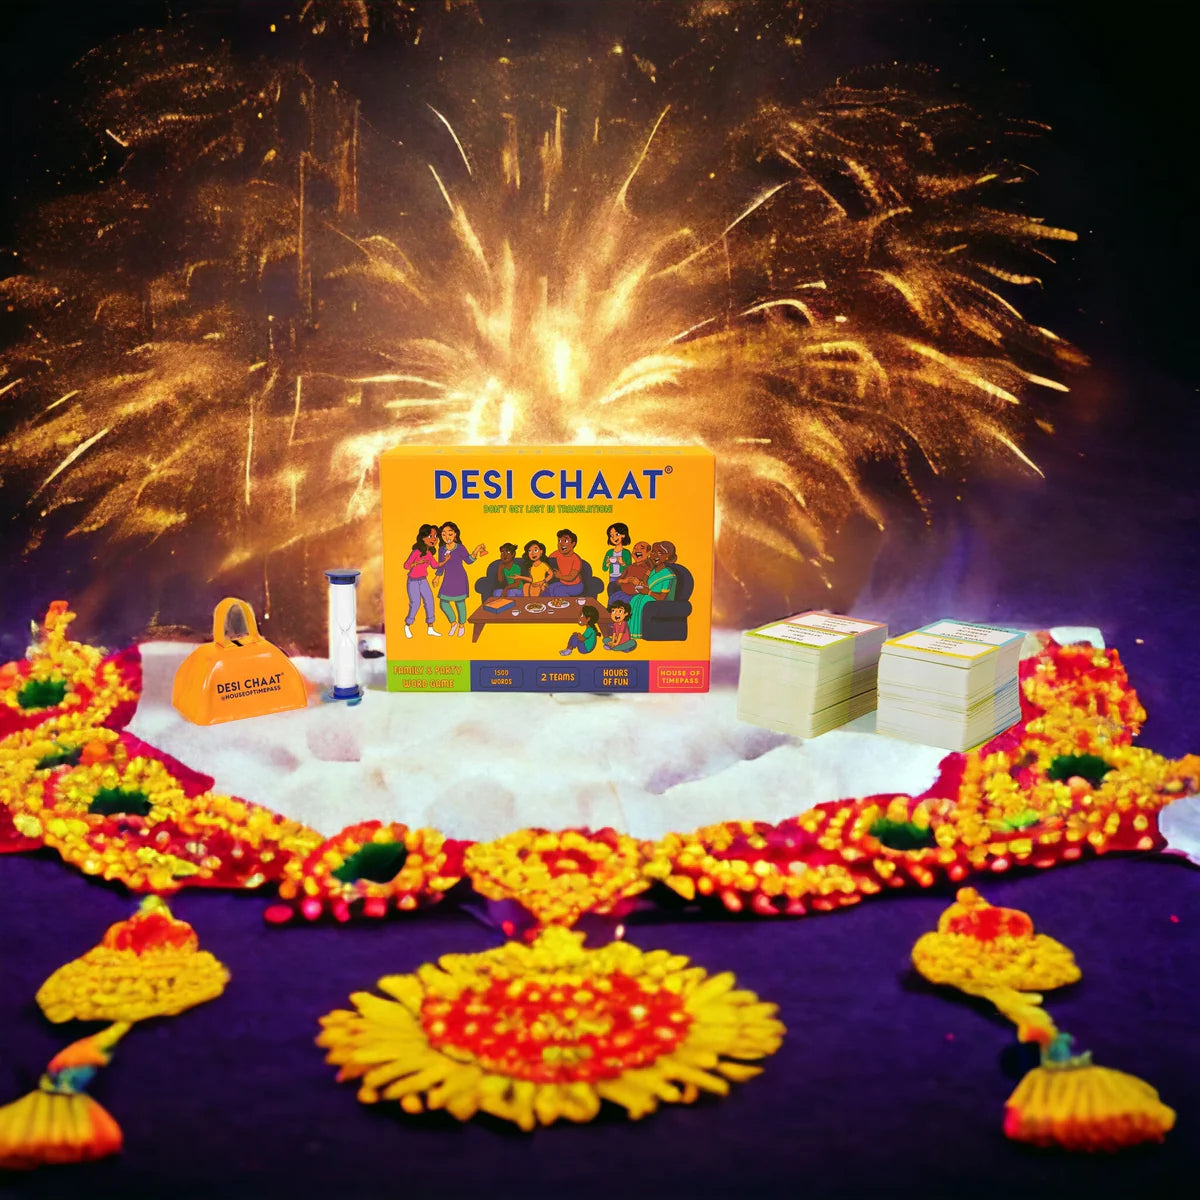 Elevate Diwali Celebrations with Desi Chaat: A game of laughter, connection and culture.